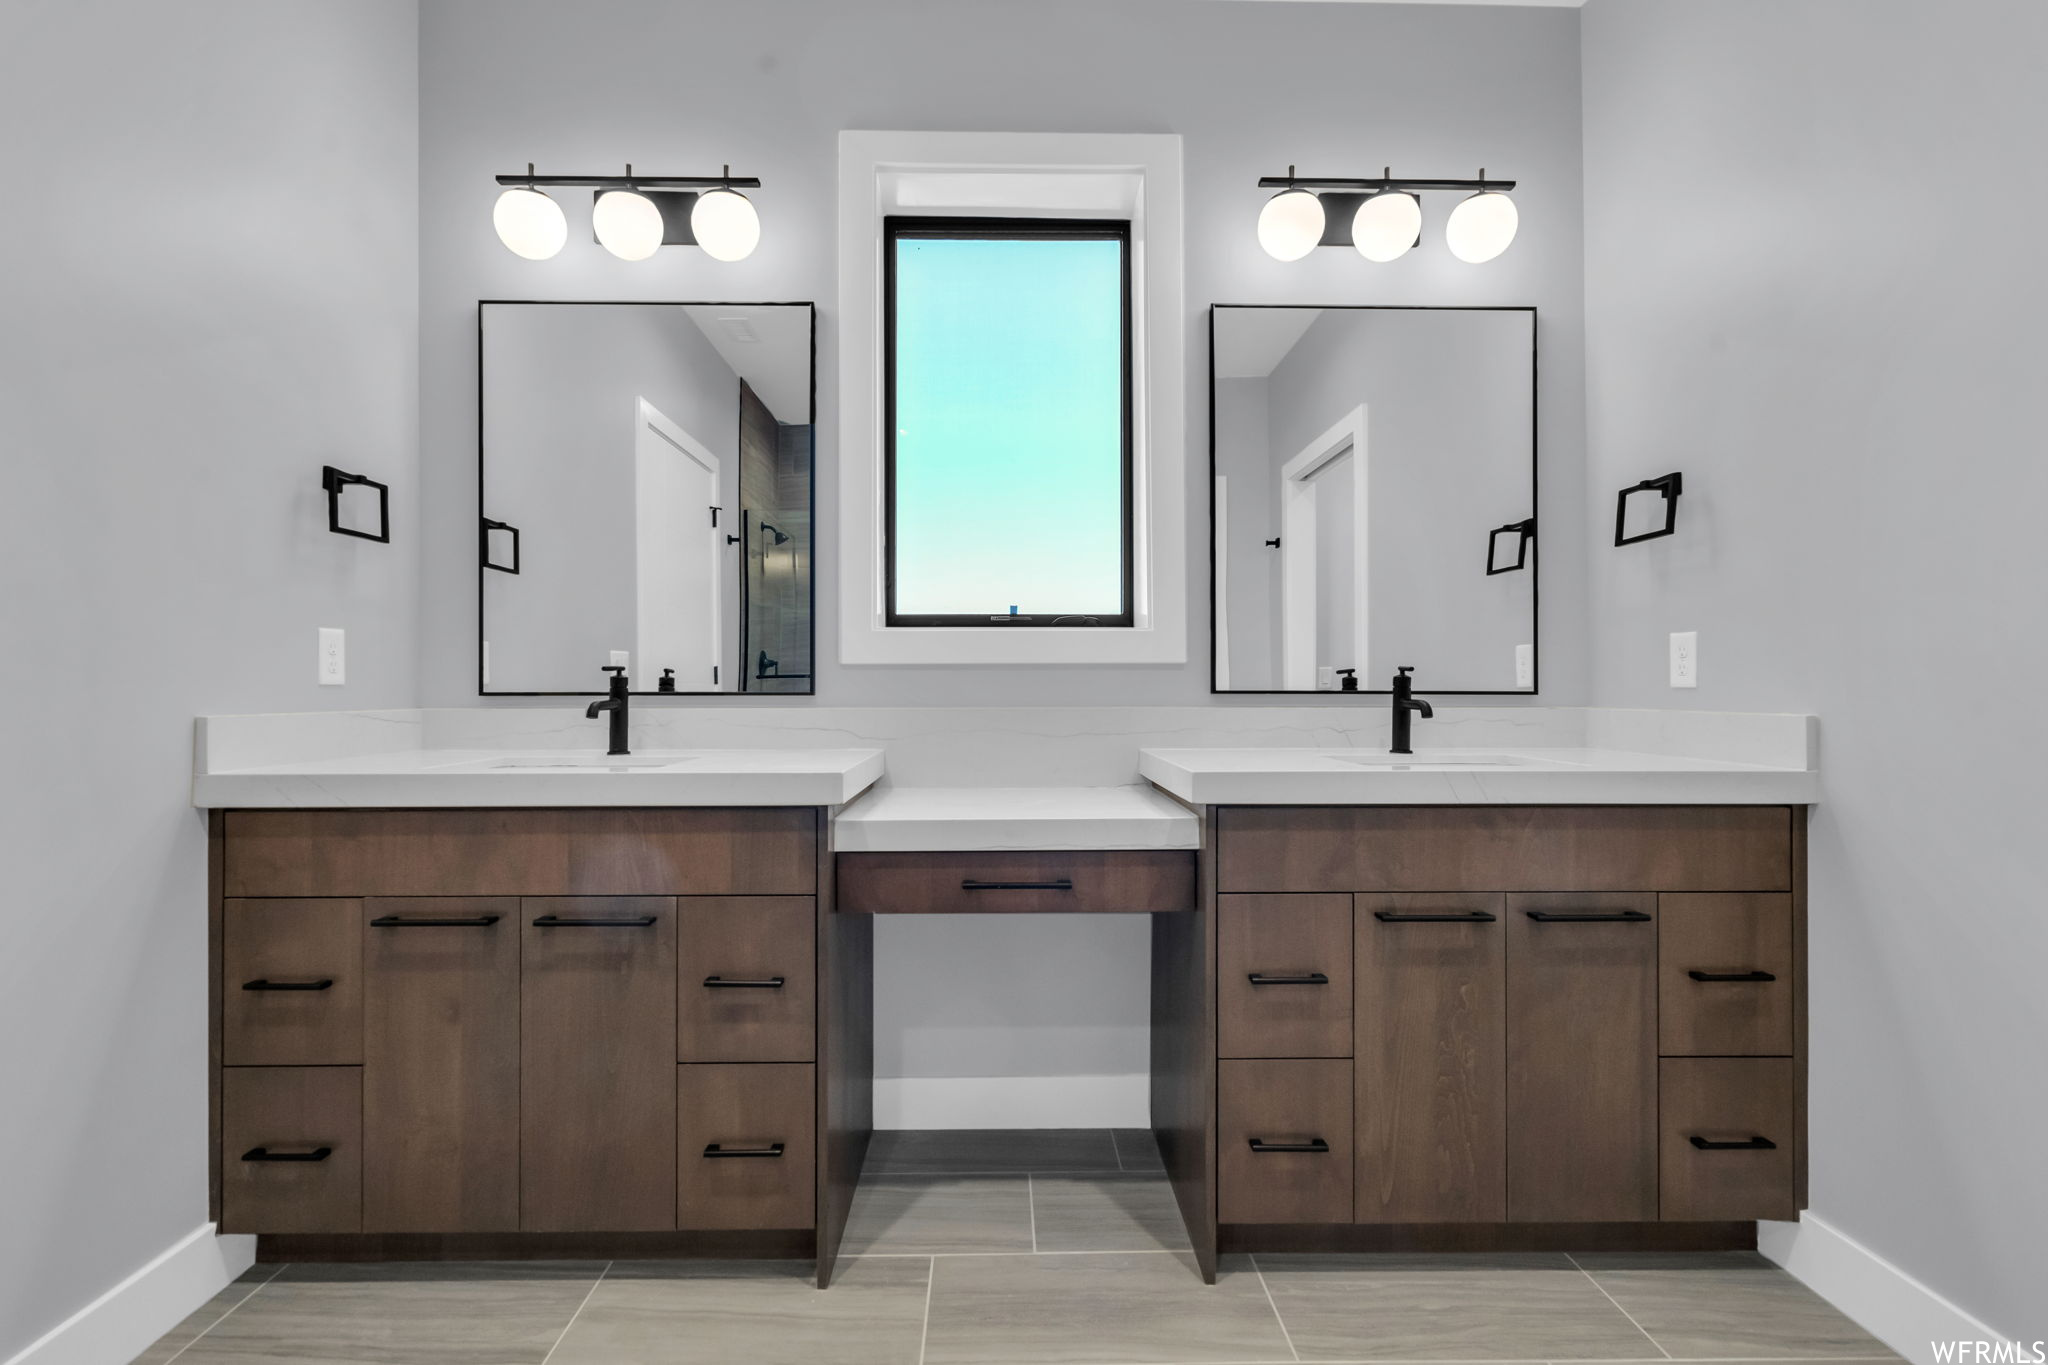 Bathroom with tile flooring and double sink vanity